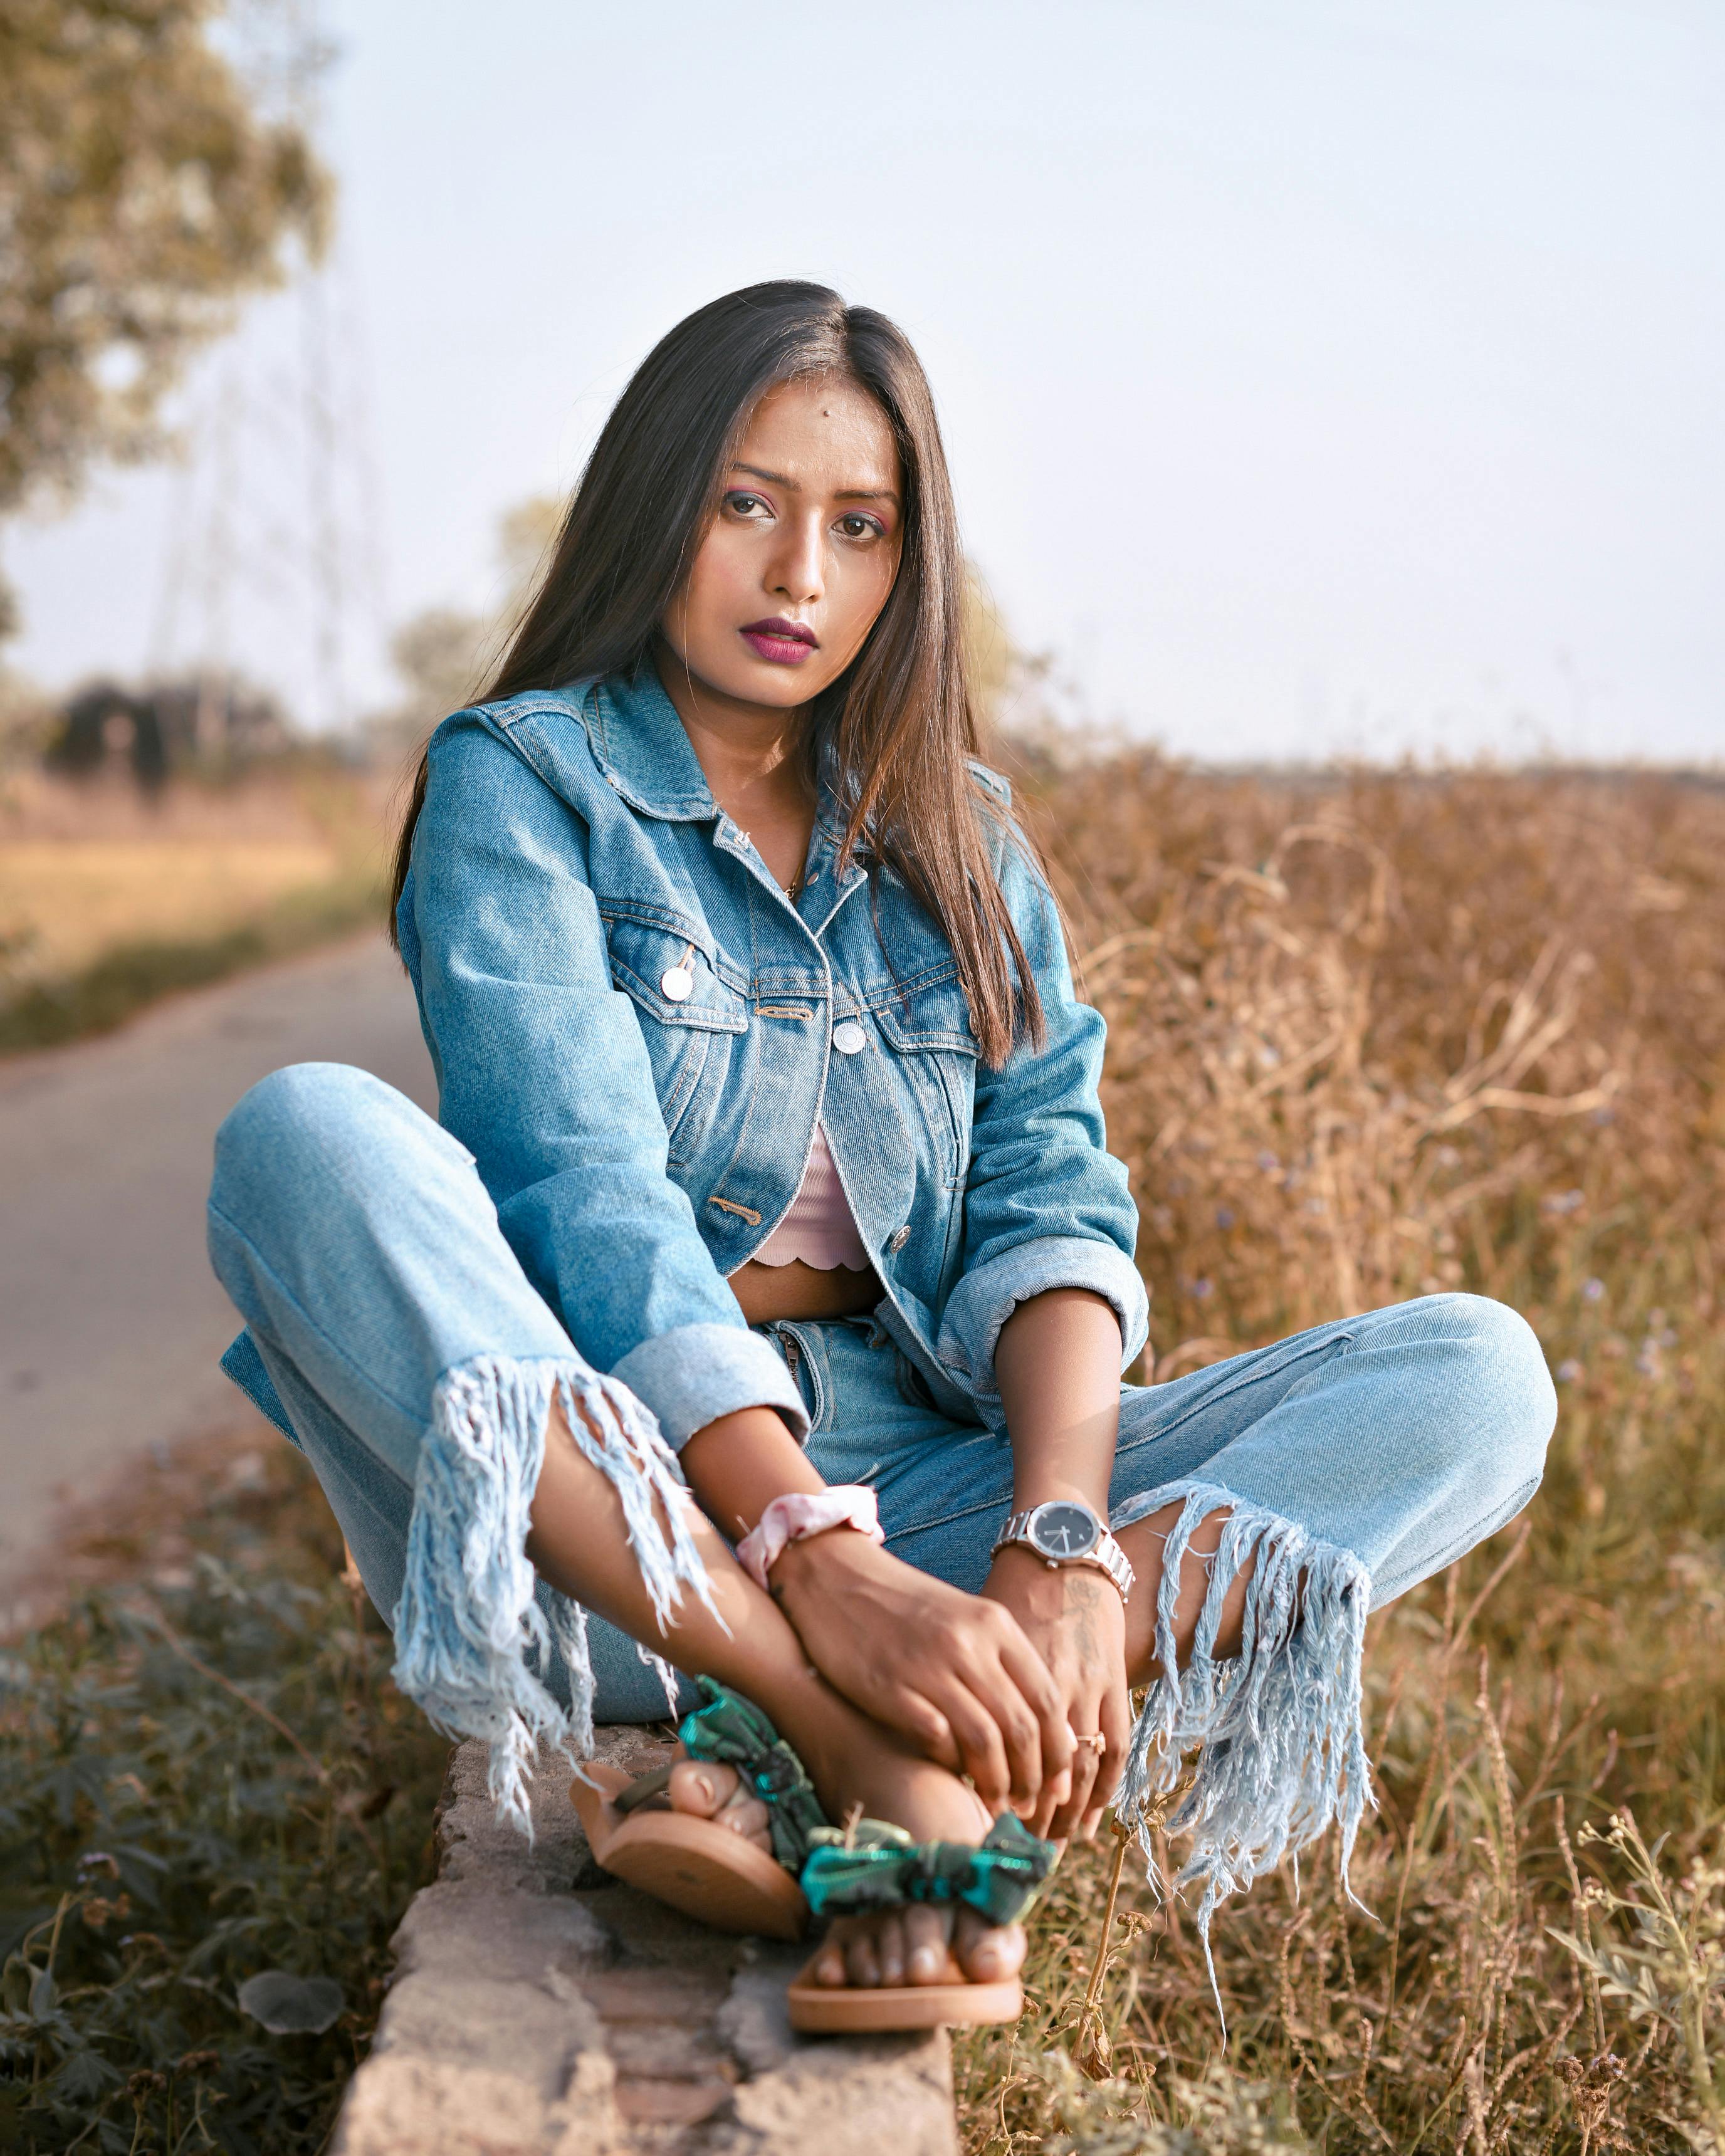 Stunning Young Fashion Model Poses in Denim Outfit Stock Image - Image of  serious, jeans: 165695701